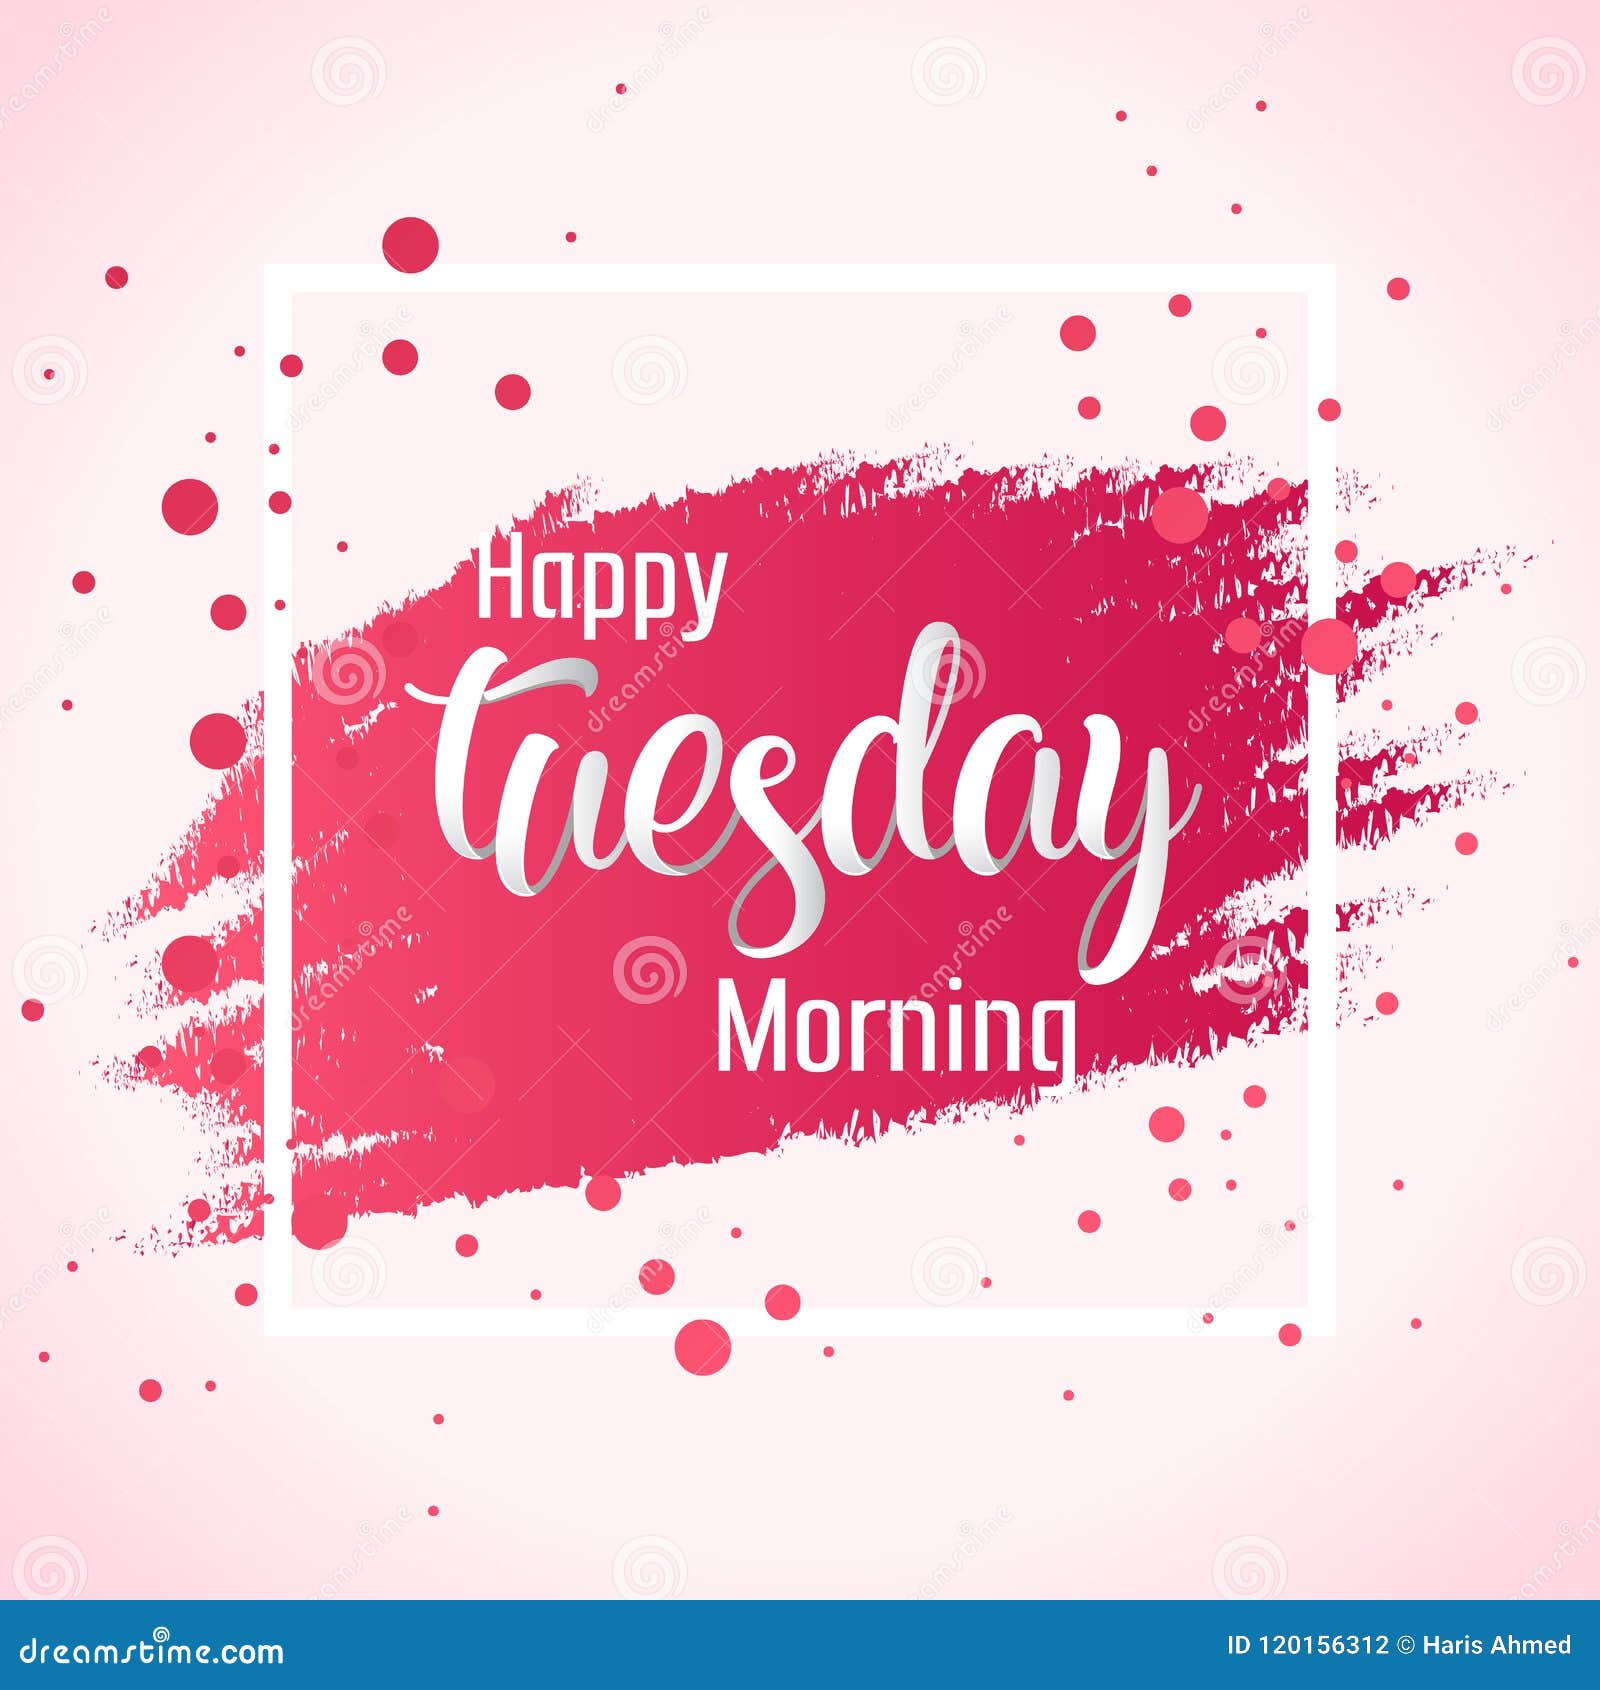 Abstract Happy Tuesday Morning Background Illustration Vector ...